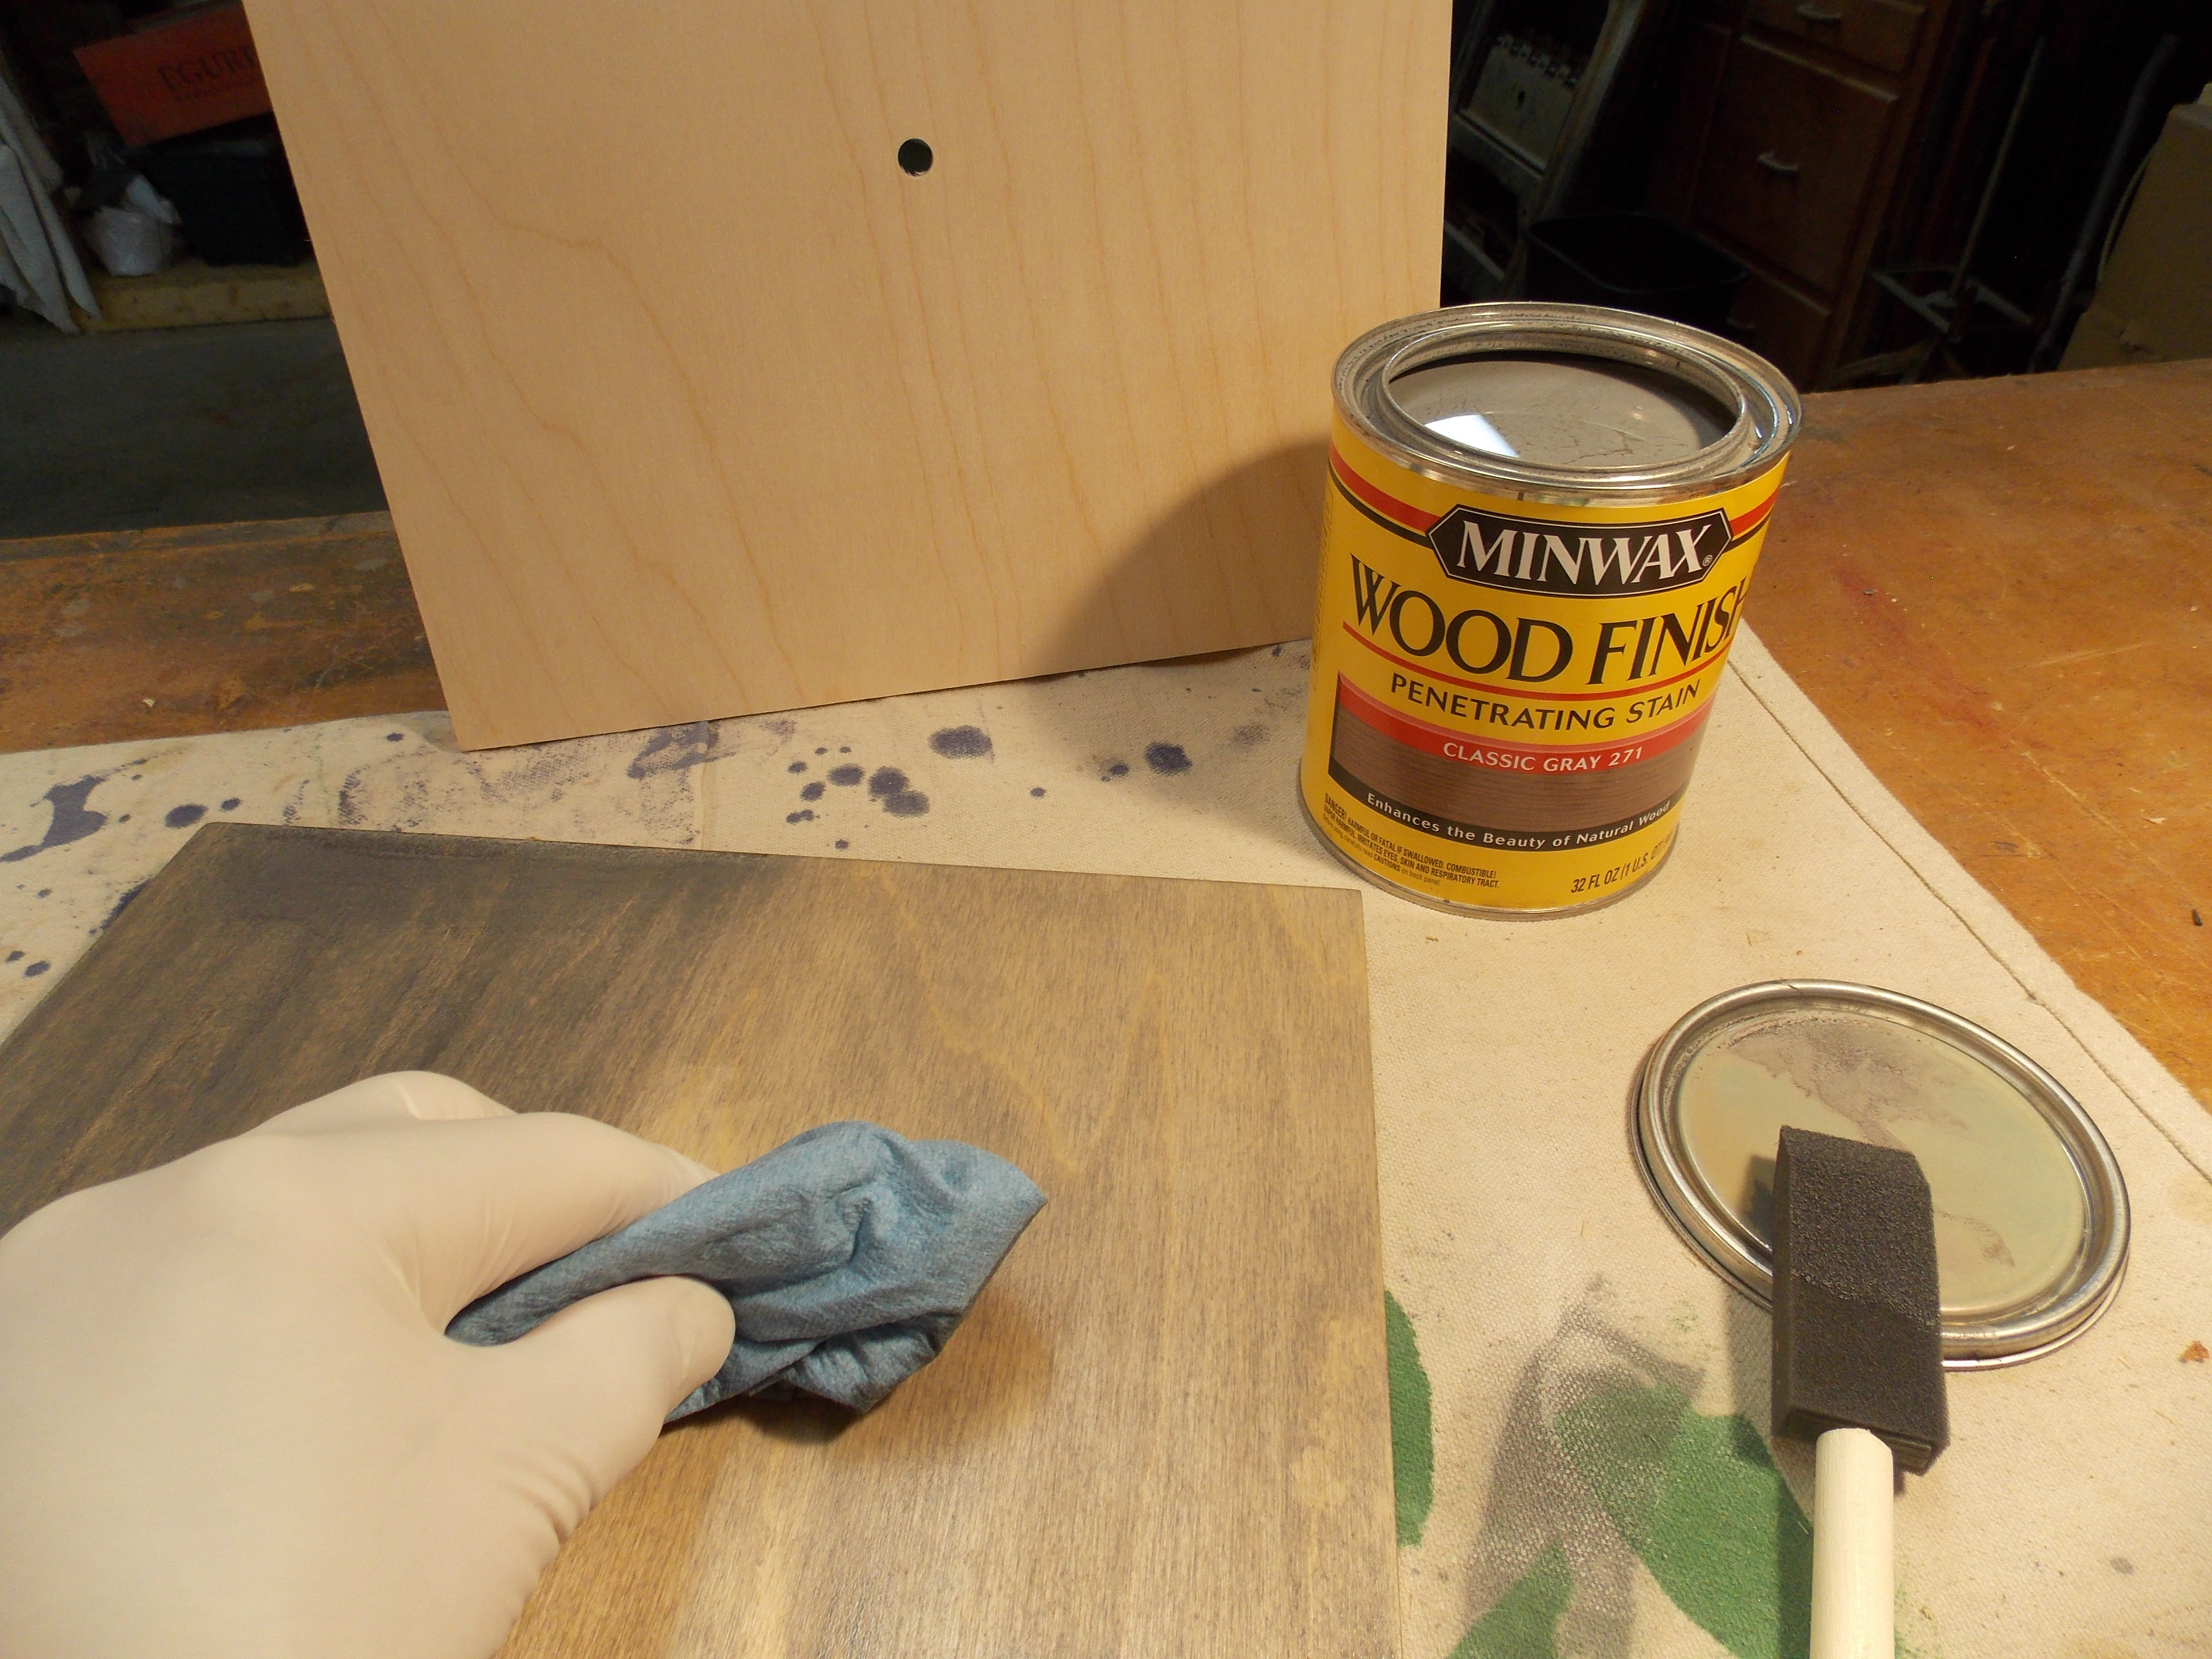 Minwax Hardwood Floor Wax Of Create A Special Clock for Any Young athlete Minwax Blog Page 4 Throughout I Stained the Square Panel with Minwaxa Wood Finisha¢ In Classic Gray Wiping Off the Excess Stain to Allow the Grain to Show with